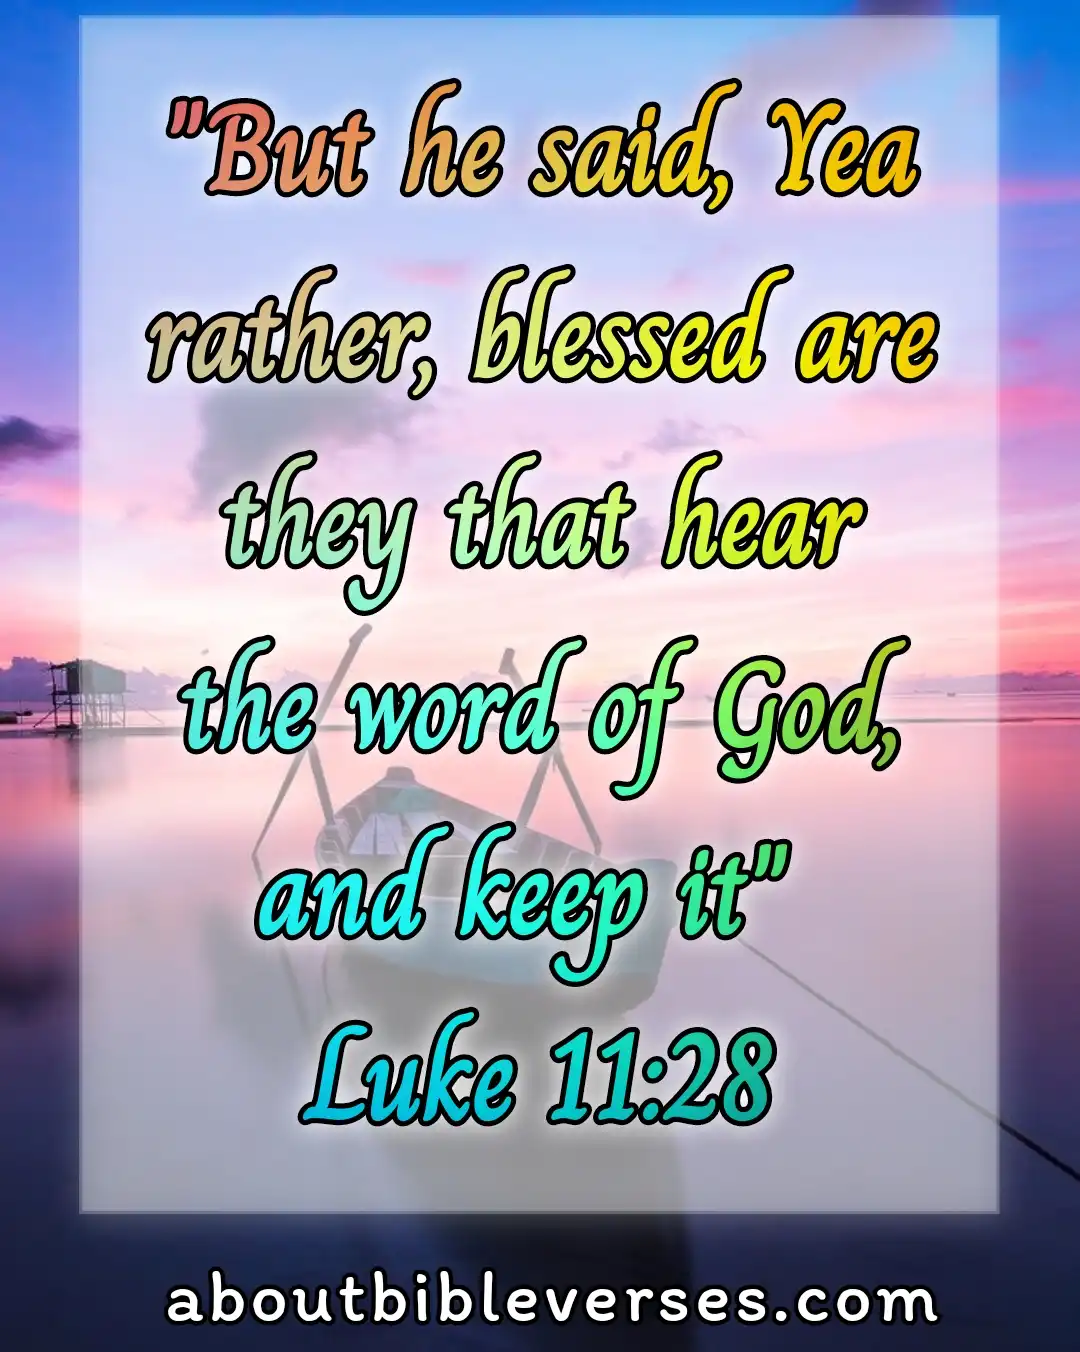 Bible Verses About Listening To The Voice Of God (Luke 11:28)